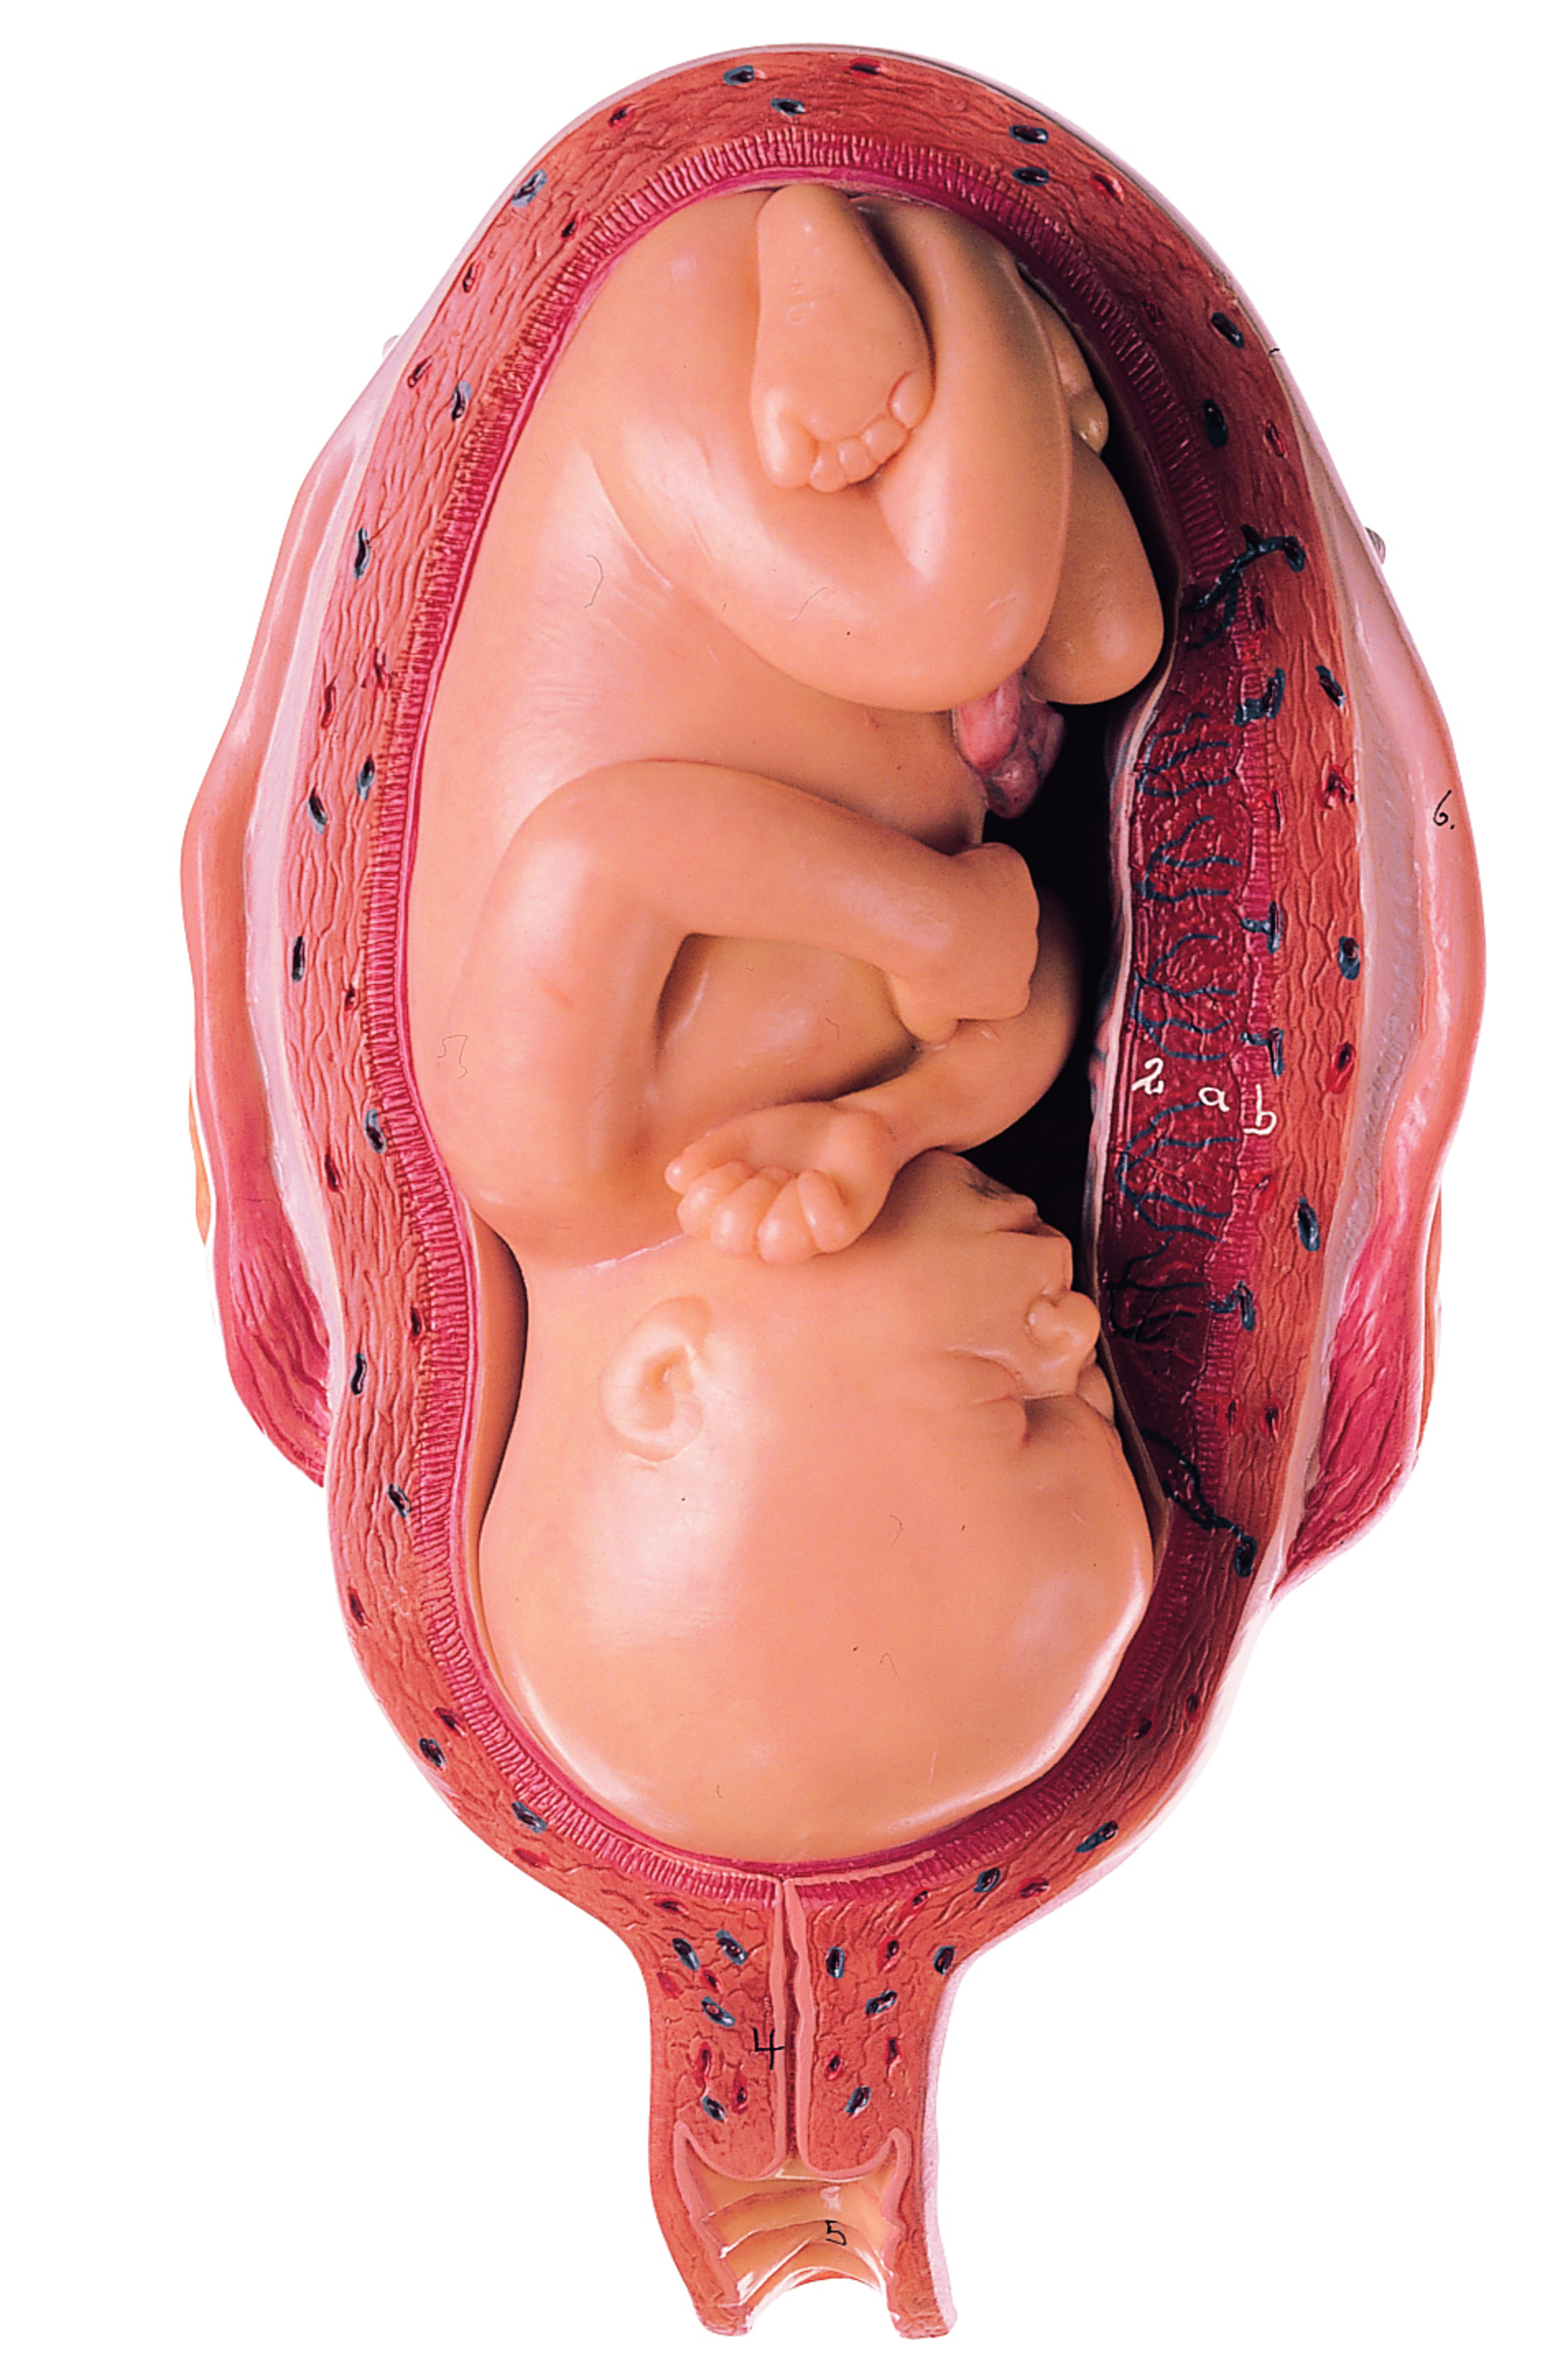 Uterus With Fetus in Seventh Month